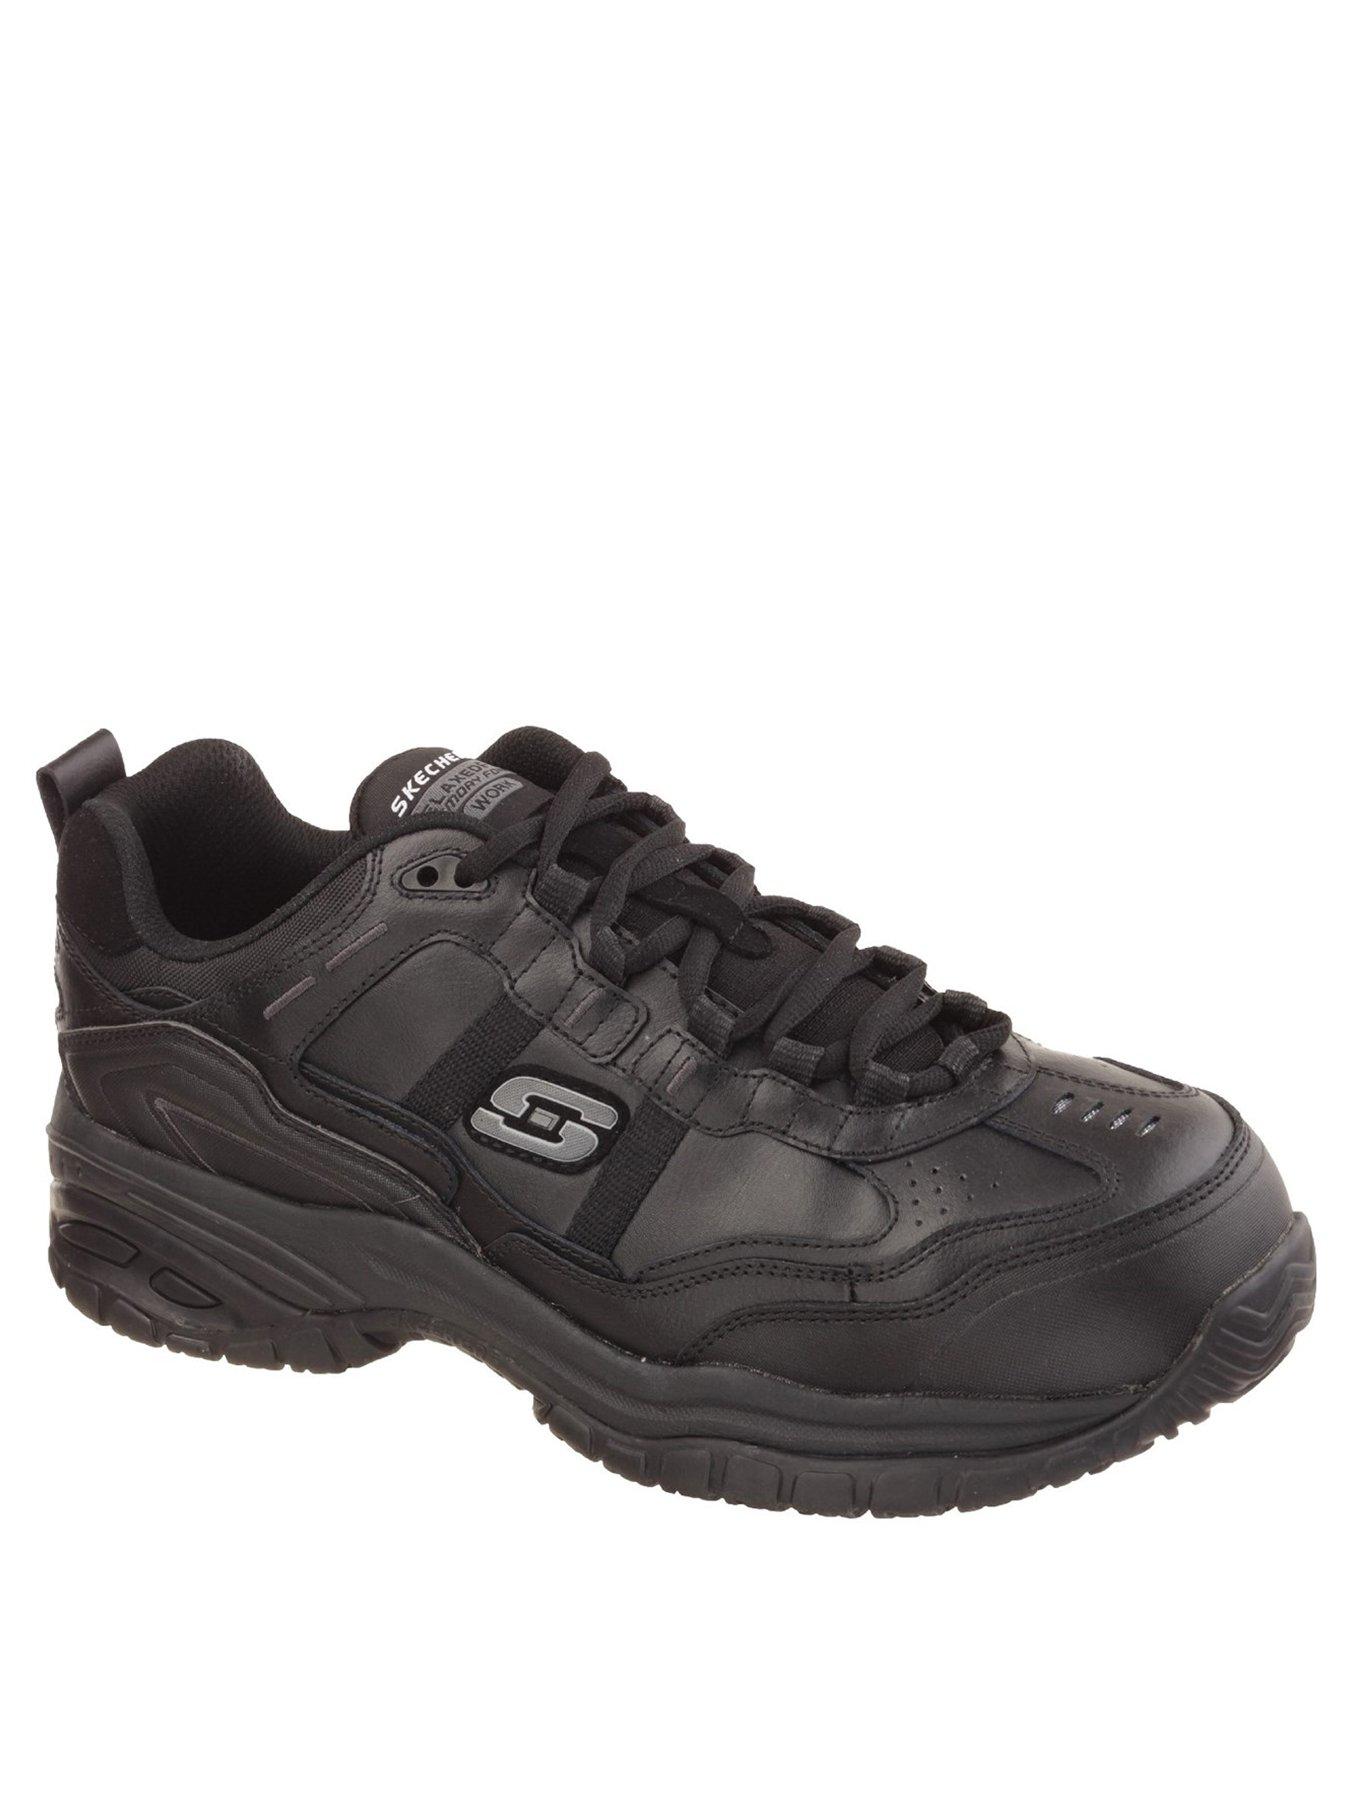 Skechers Work Relaxed Fit Lace Up Shoe 